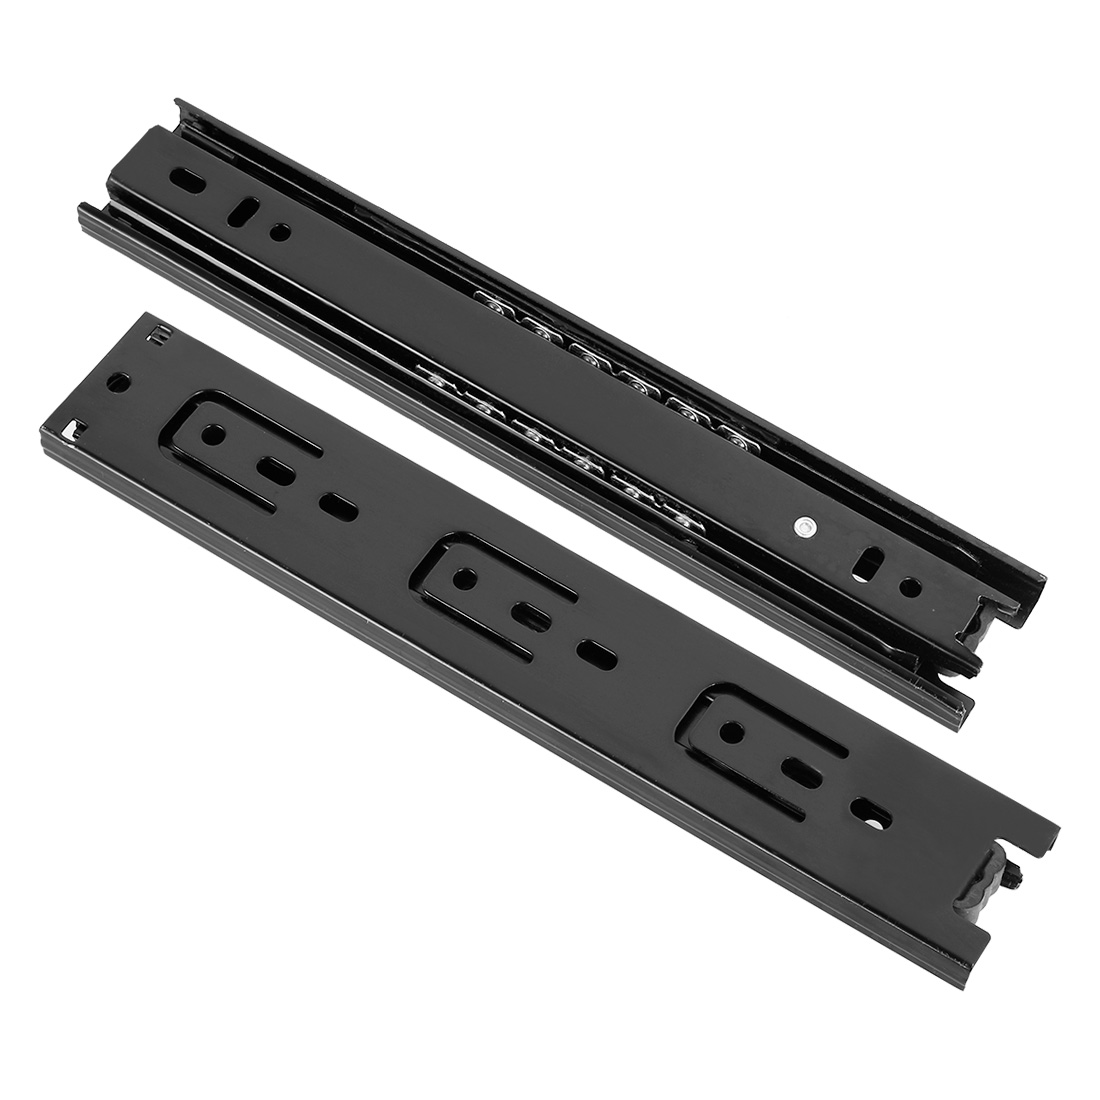 uxcell Ball Bearing Side Mount Drawer Slides, Full Extension,9-Inch,100lbs Capacity,40mm Wide, Black, 1 Pair